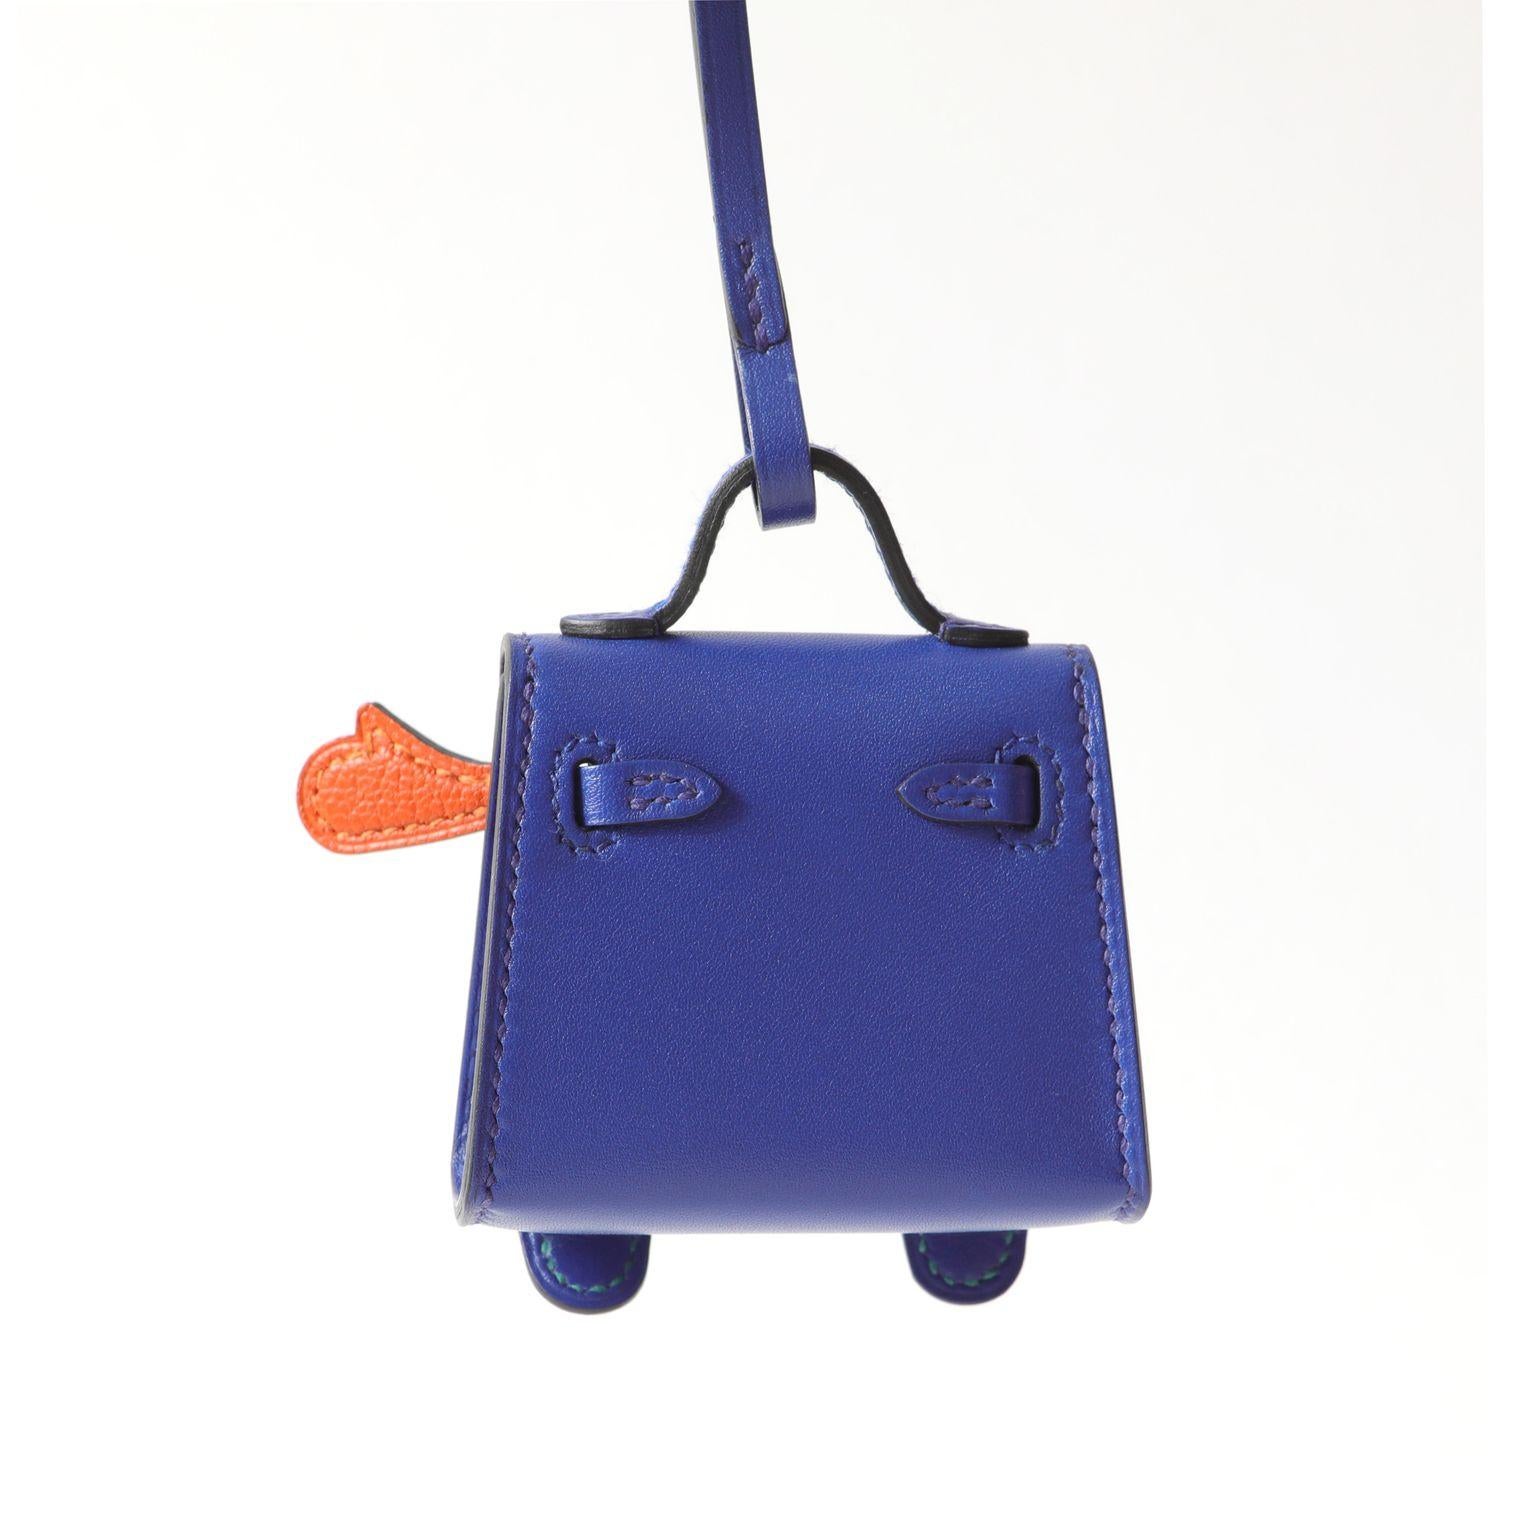 This authentic Hermès Blue Electric Kelly Doll Bag Charm is brand new.  Adorable iconic Kelly Bag in bright Electric Blue with Palladium hardware and colorful face.  Box  included.

PBF 13672
